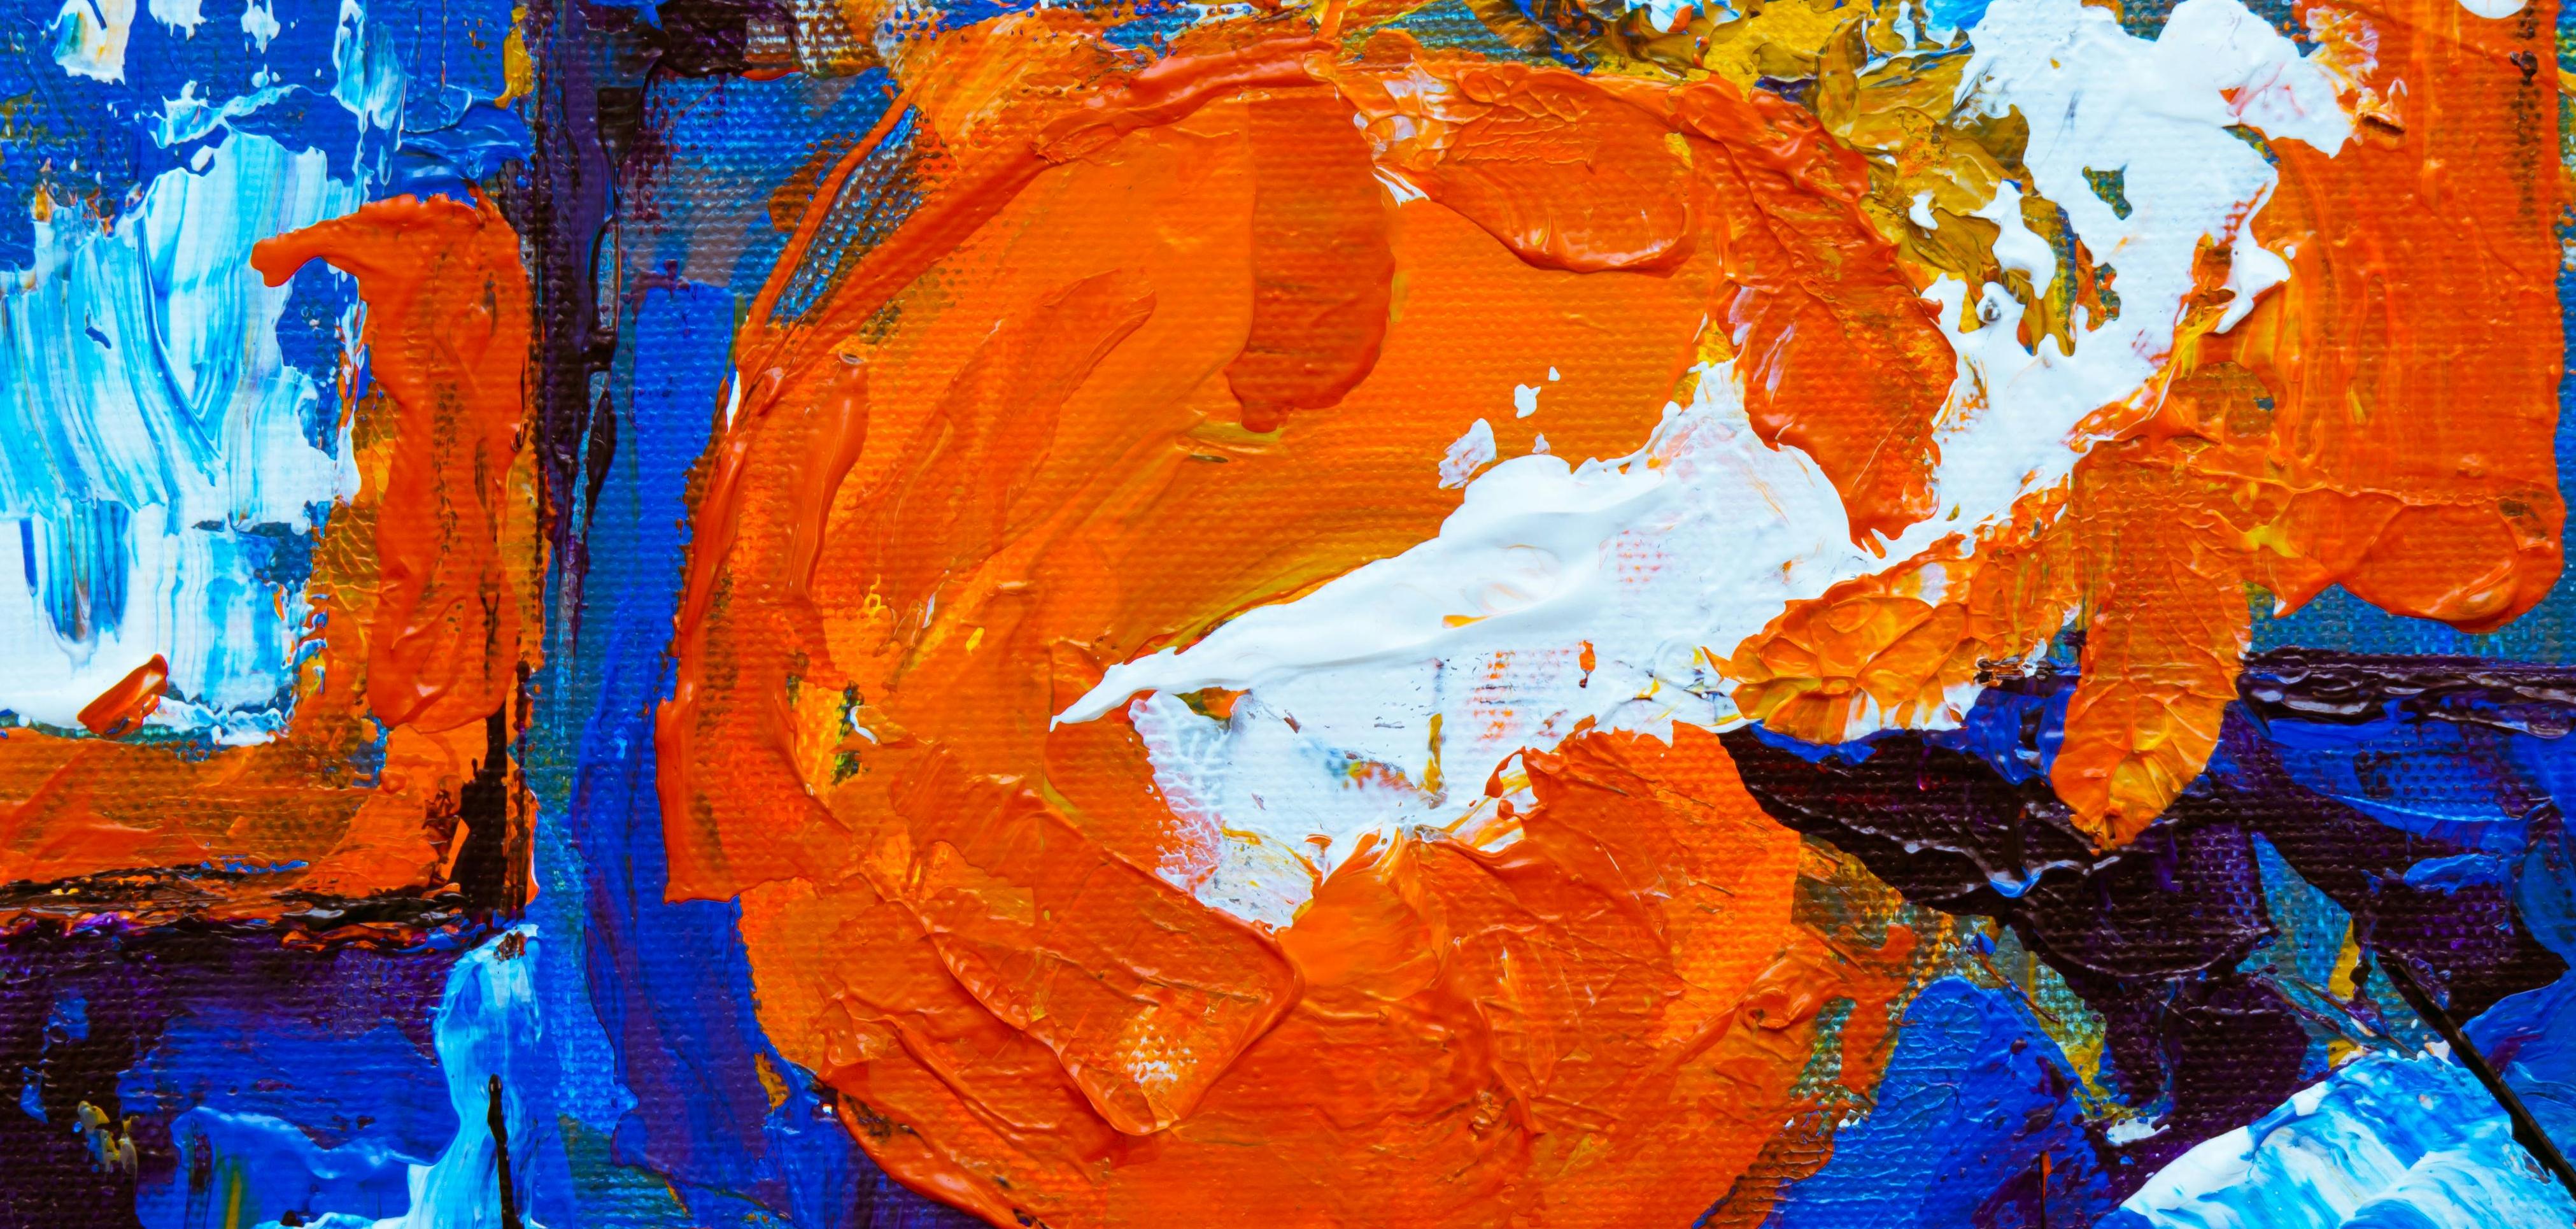 Abstract painting featuring orange and blue